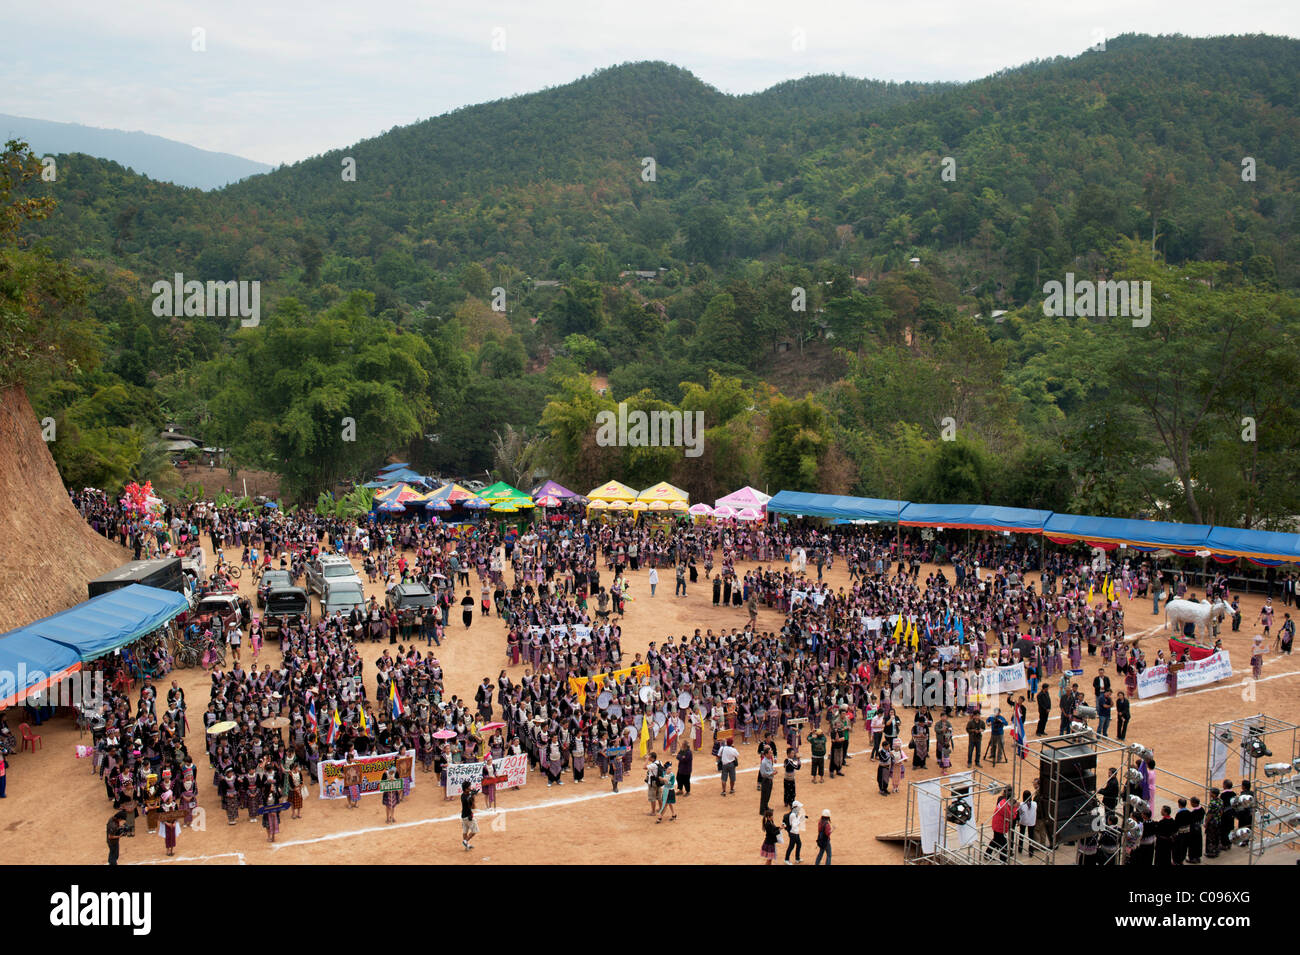 Hmong men and women take part in a new year festival parade at Hung Saew village, Chiang Mai, Thailand. Stock Photo